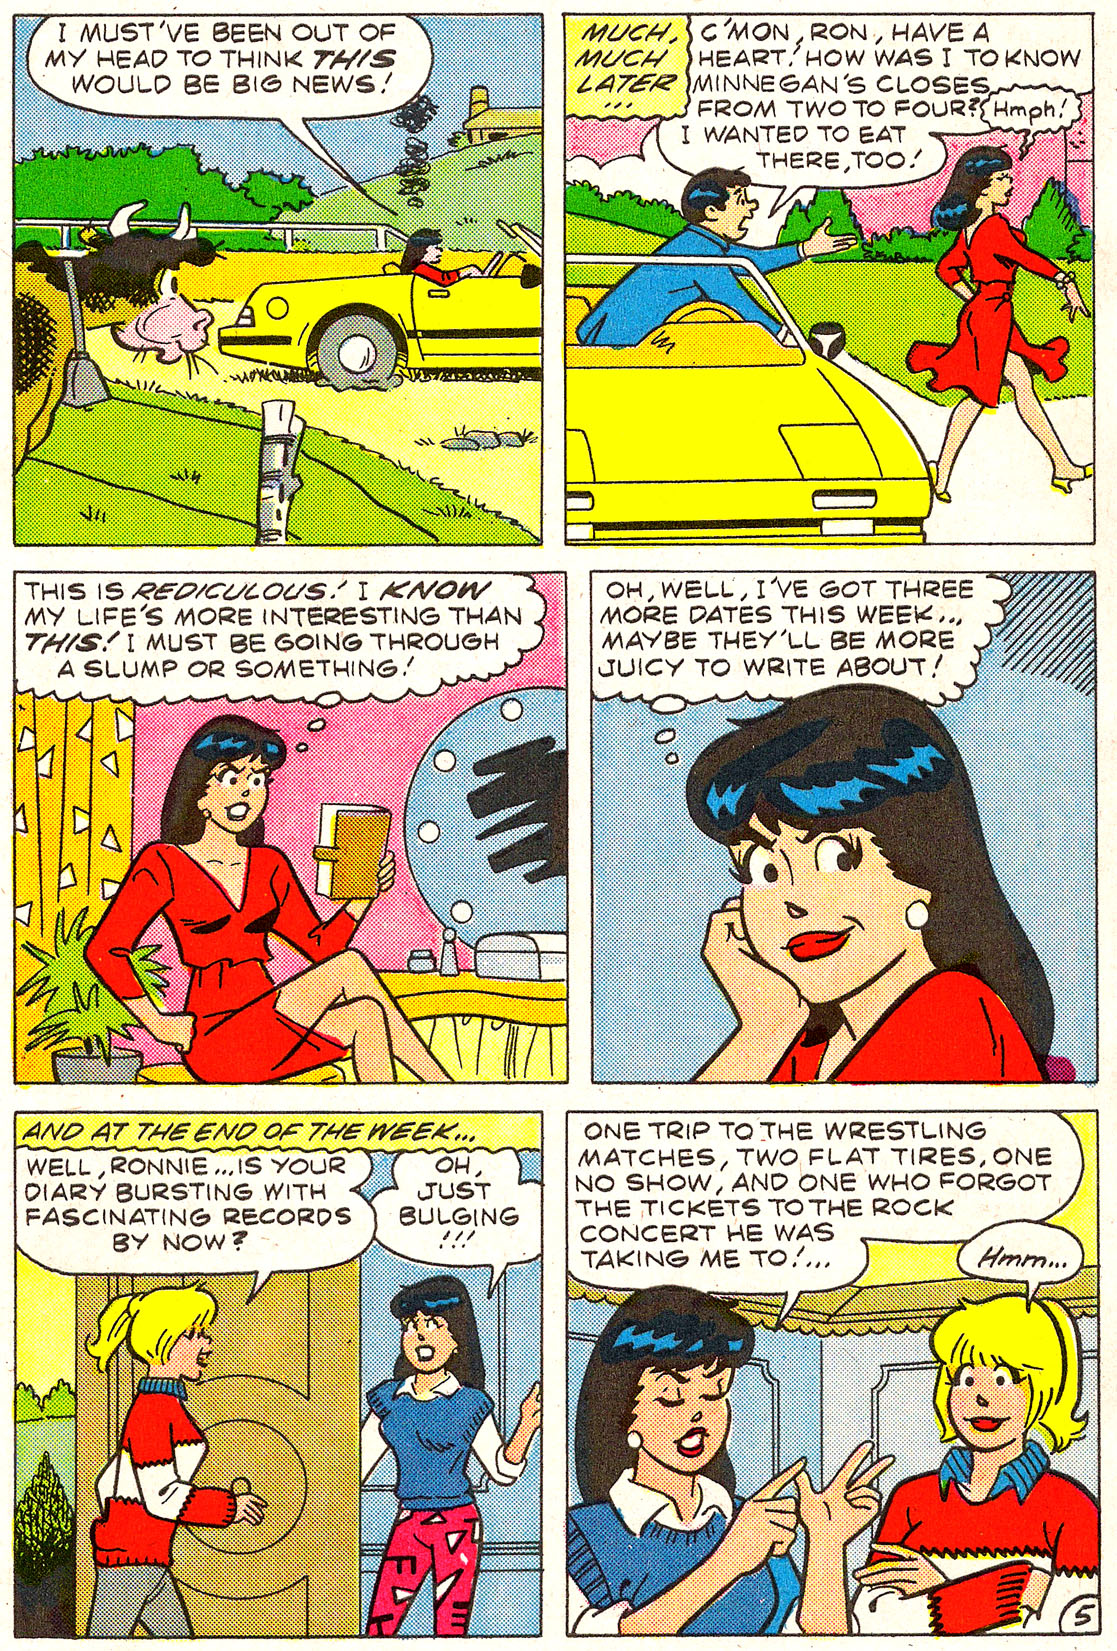 Read online Archie's Girls Betty and Veronica comic -  Issue #345 - 7